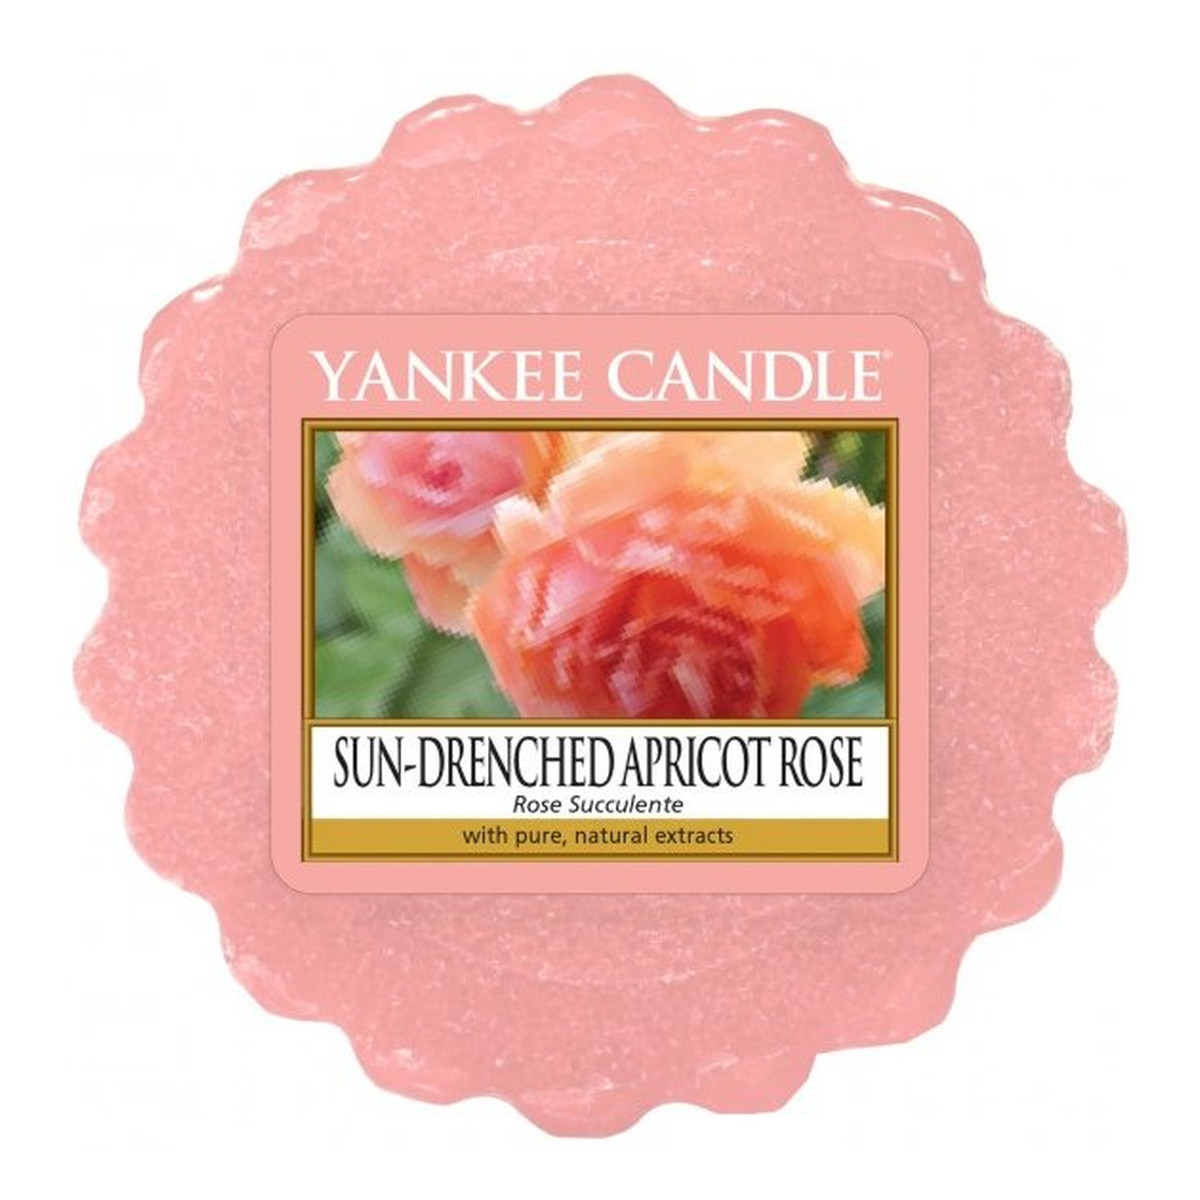 Yankee Candle Wax Wosk Sun-Drenched Apricot Rose 22g